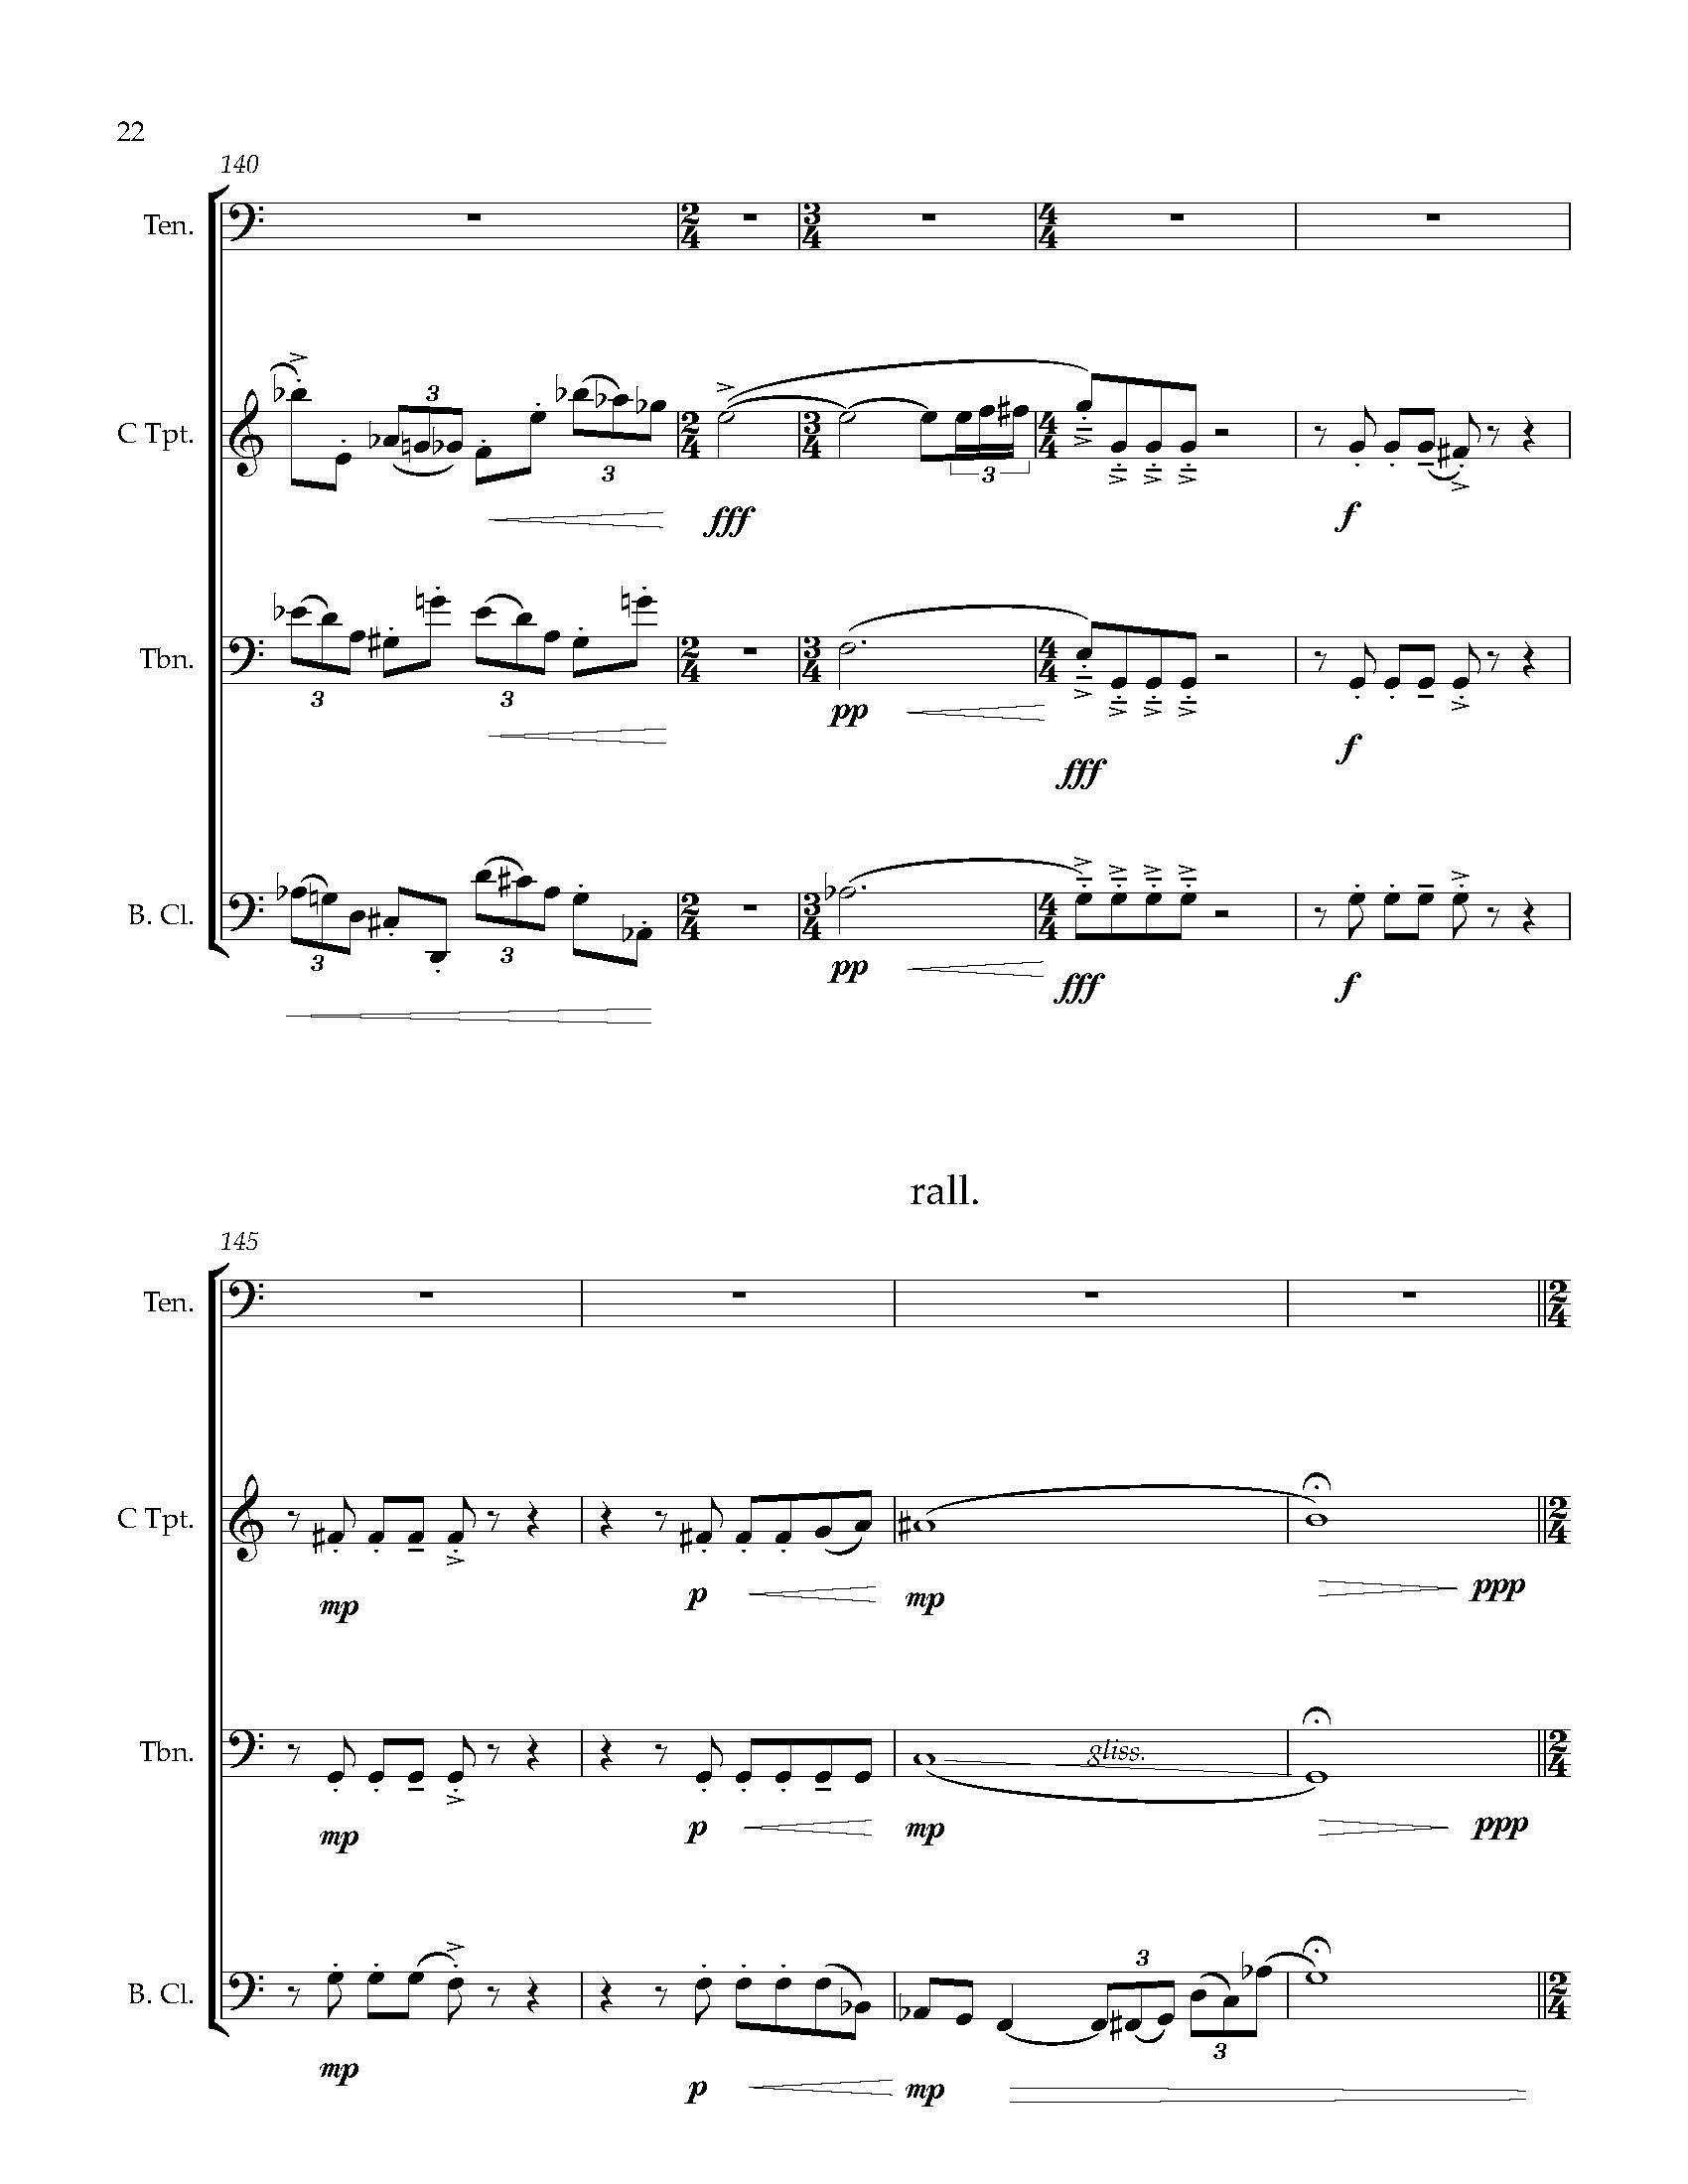 Many Worlds [1] - Complete Score_Page_31.jpg